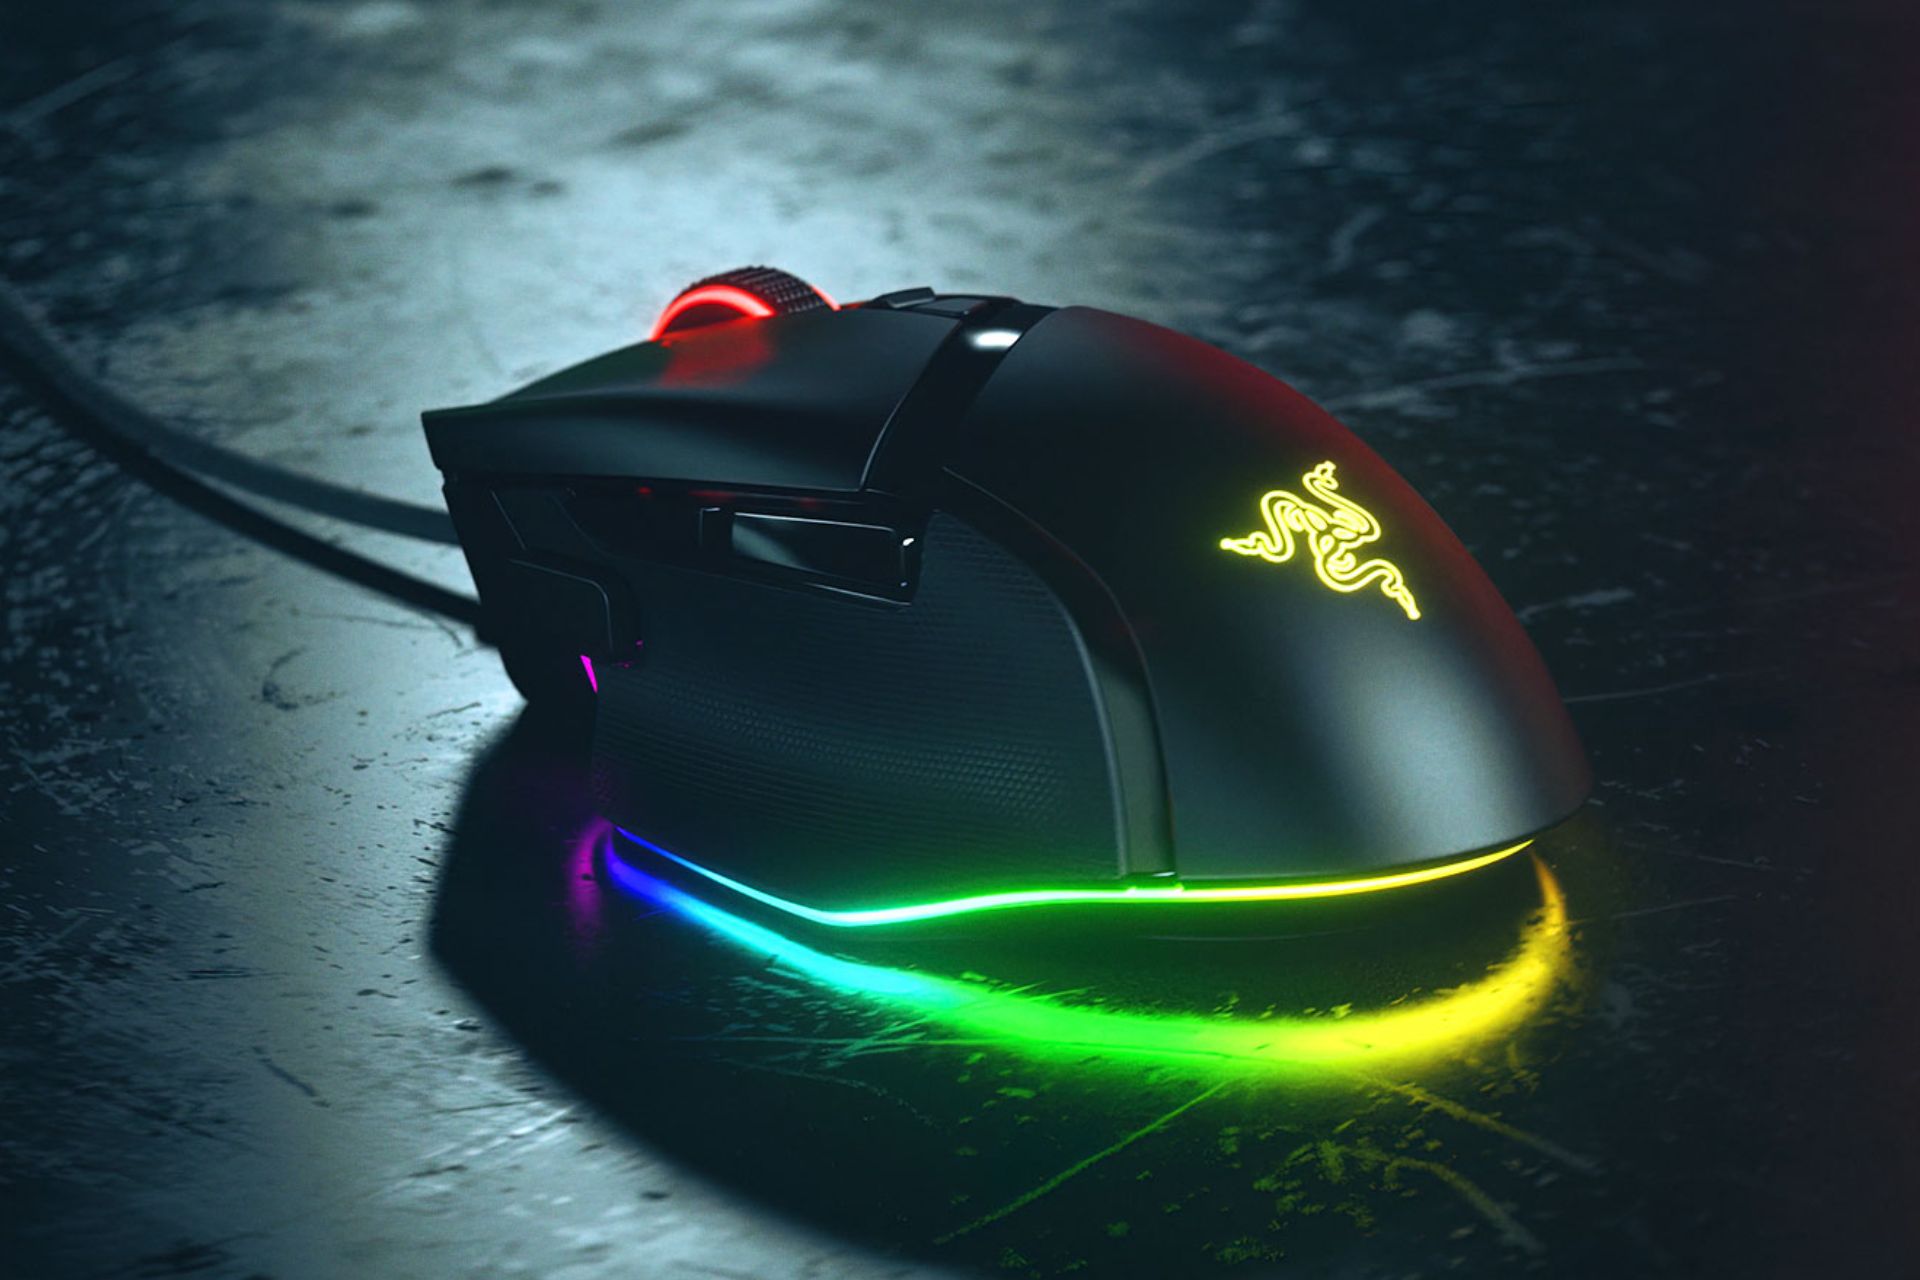 Steal the deal Razer Basilisk V3 gaming mouse is now available at a 20% discount